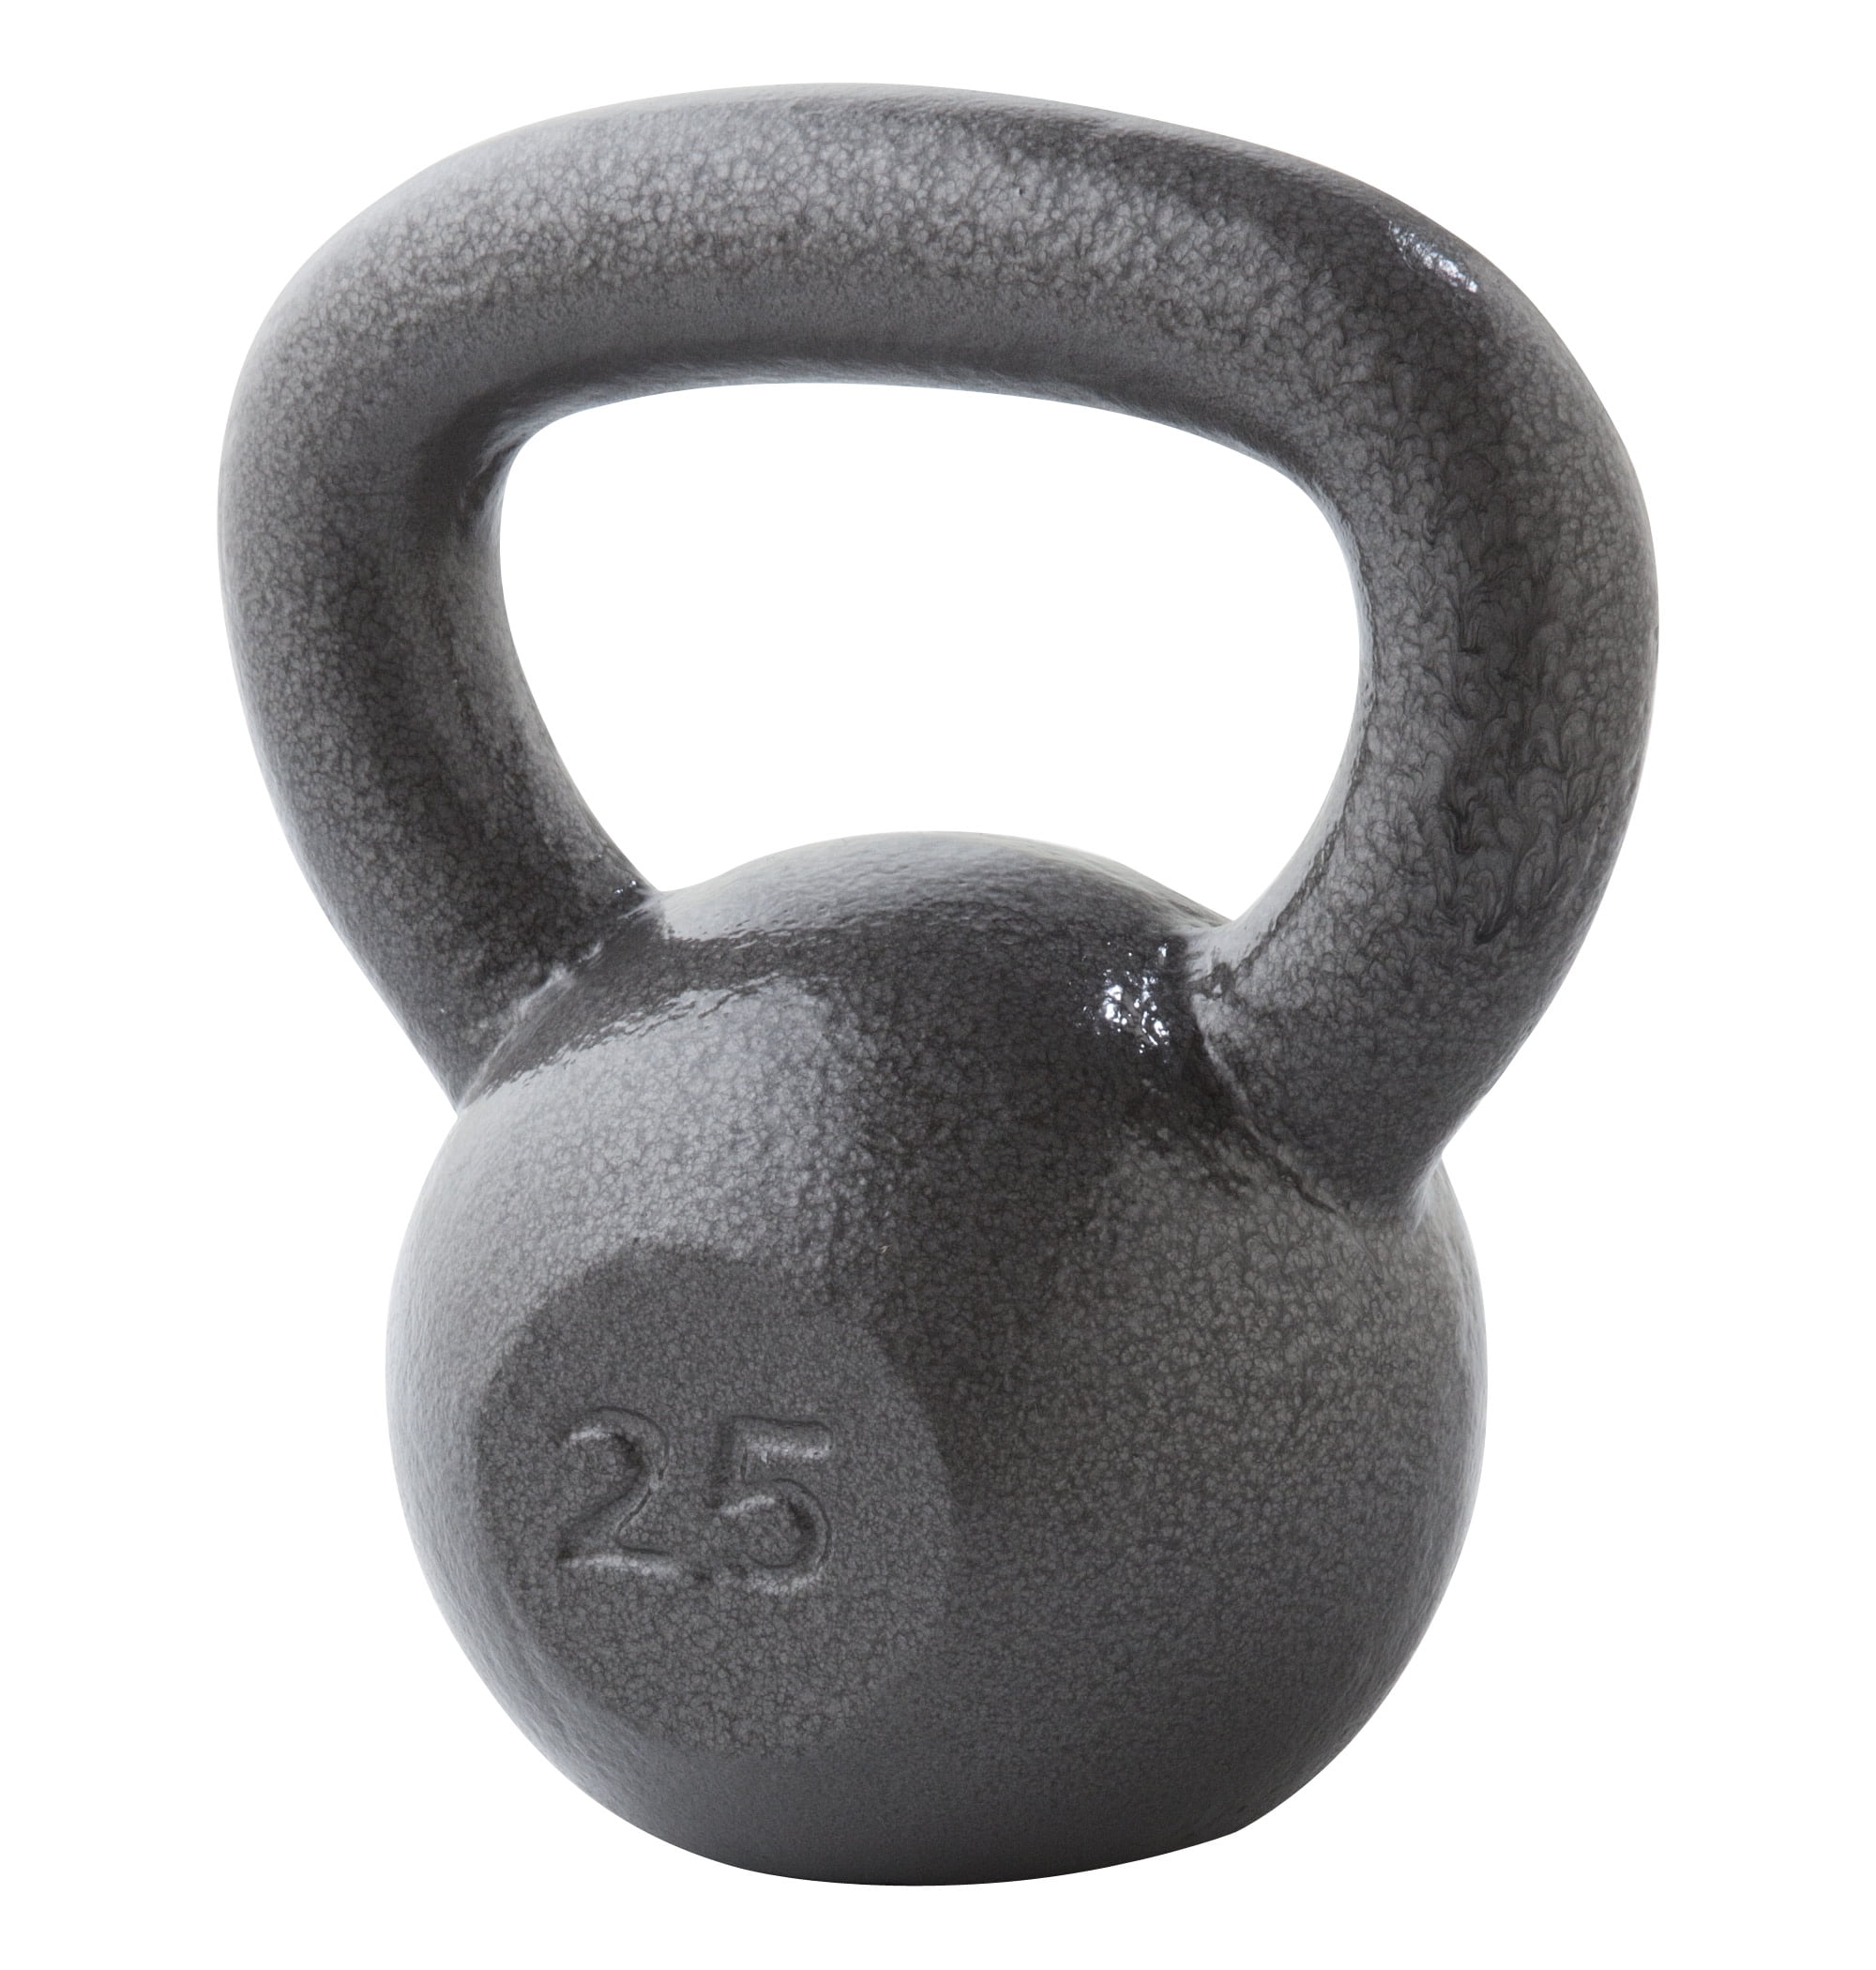 Vinyl Coated and Solid Casting 10 lb Kettlebell 